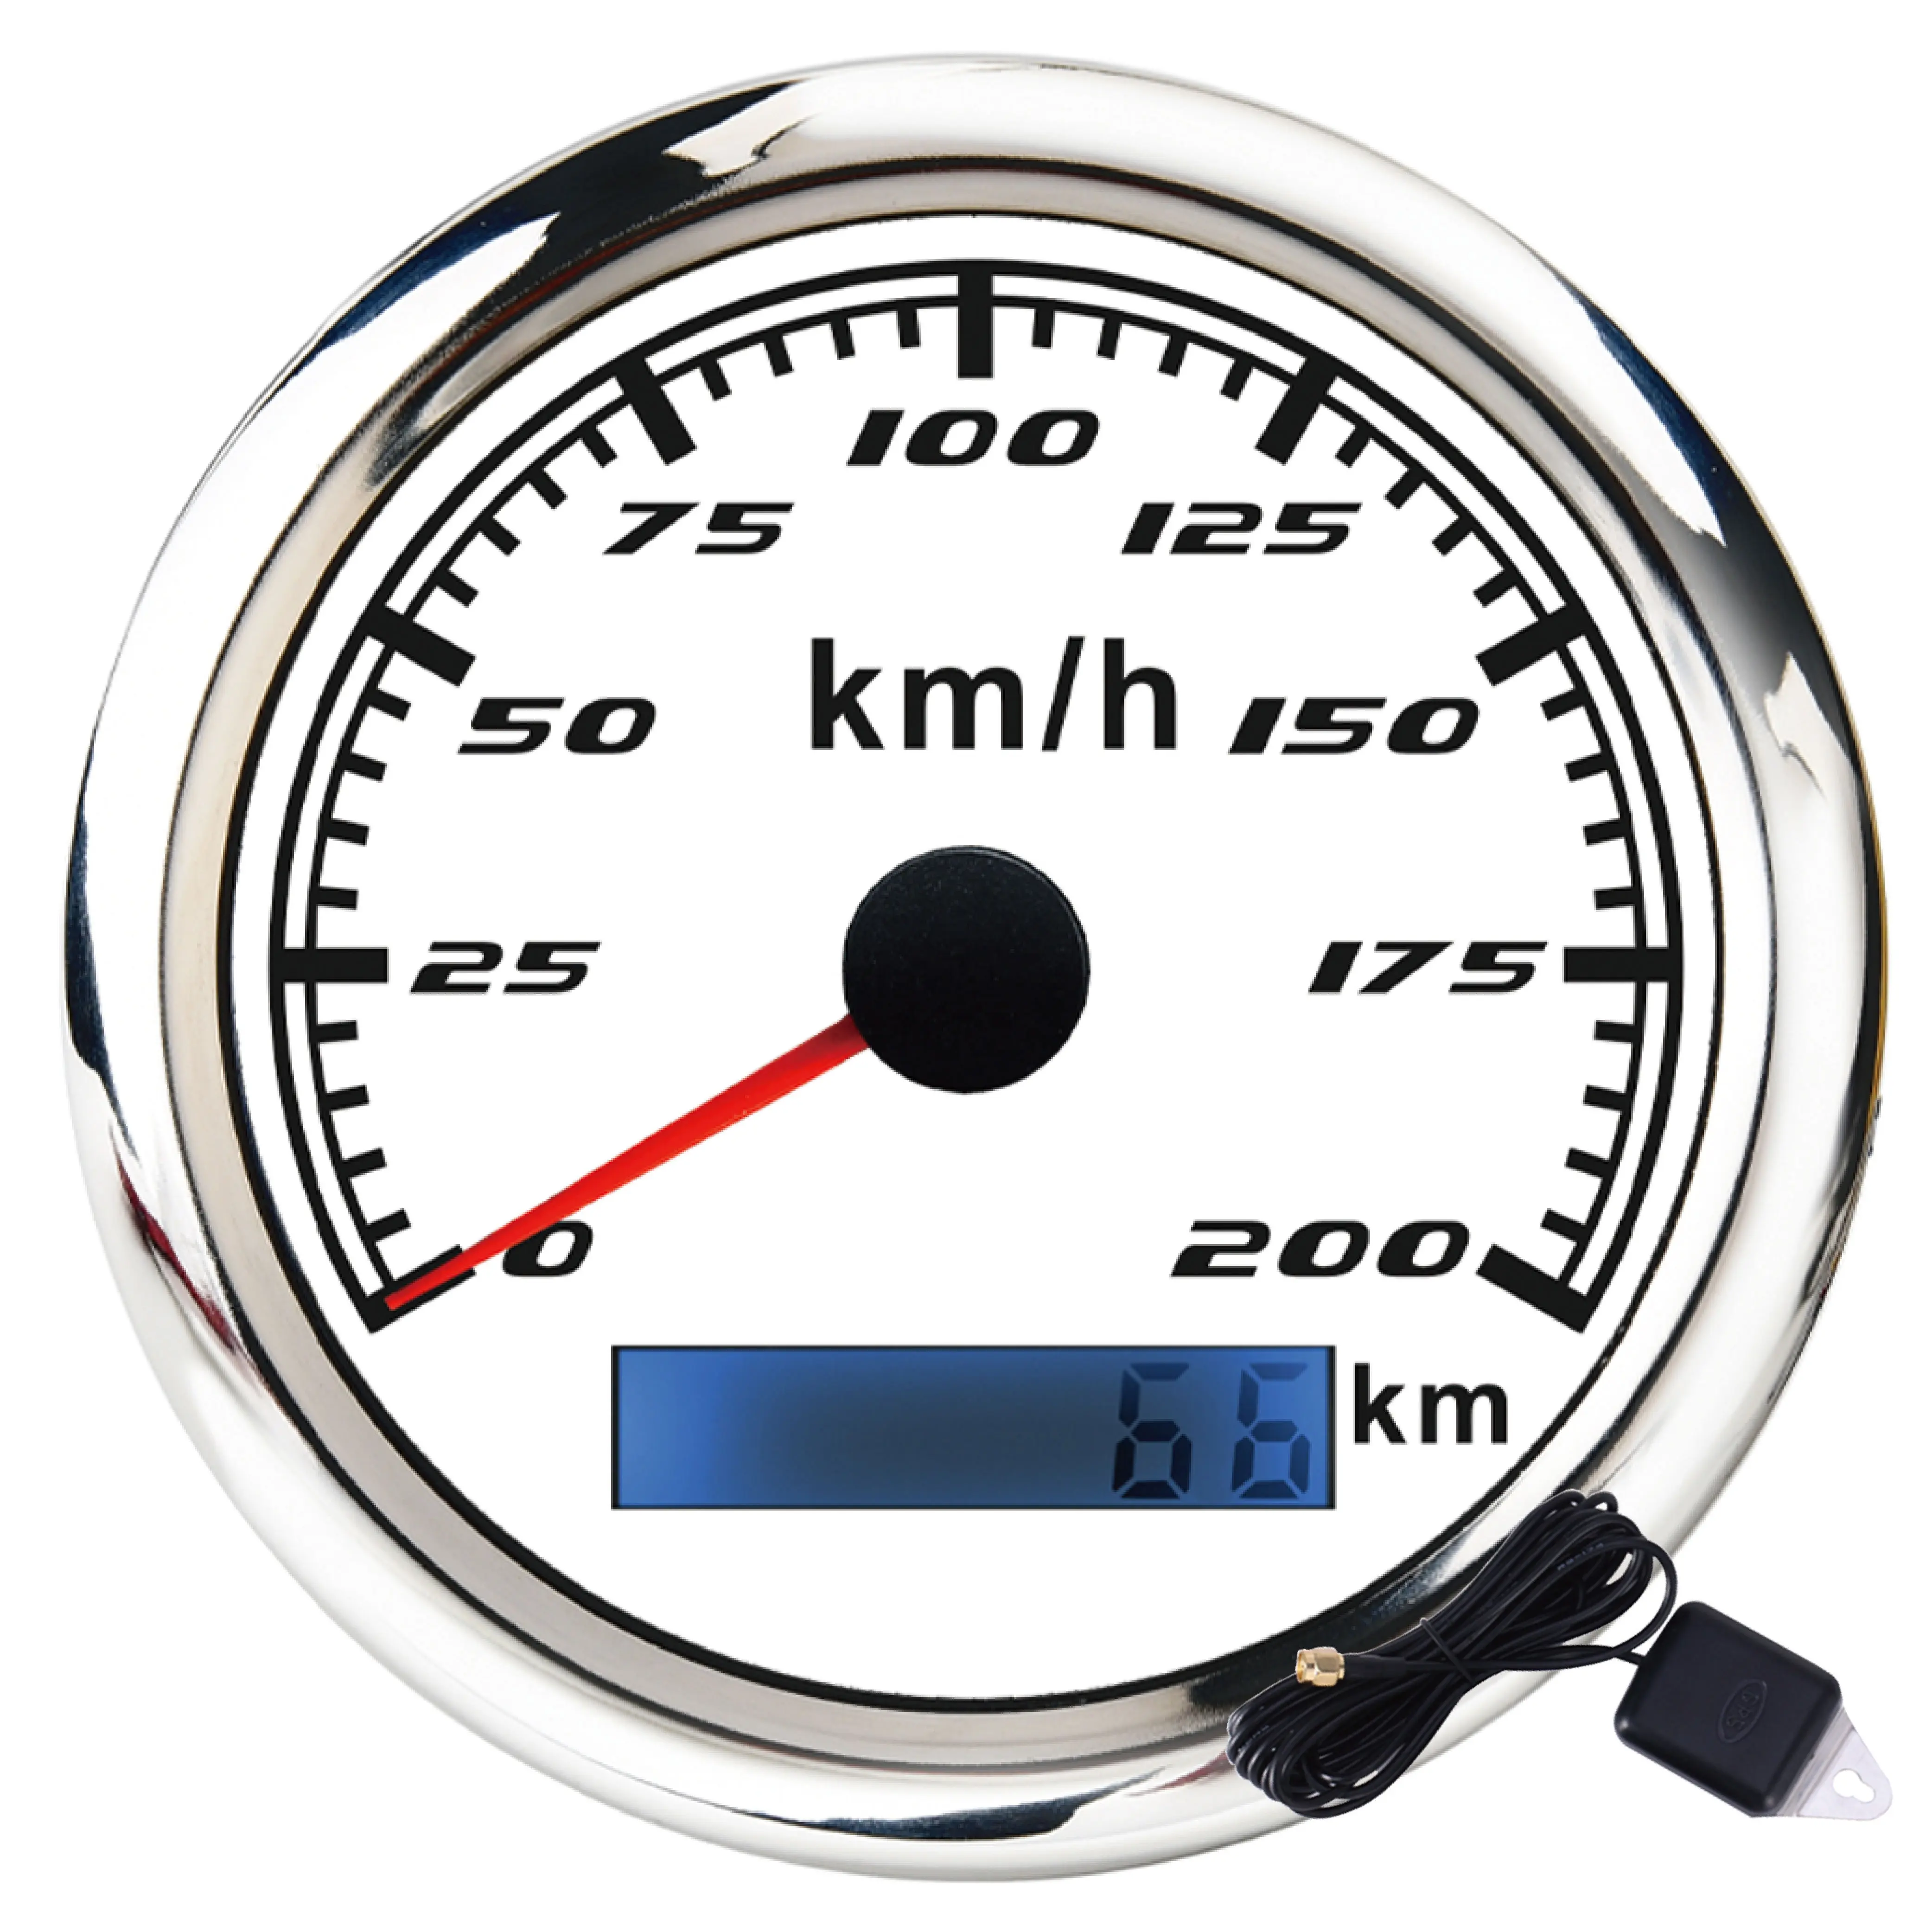 85mm needle with red LED and LCD display 200 kmh speedometer gauge with GPS sensor